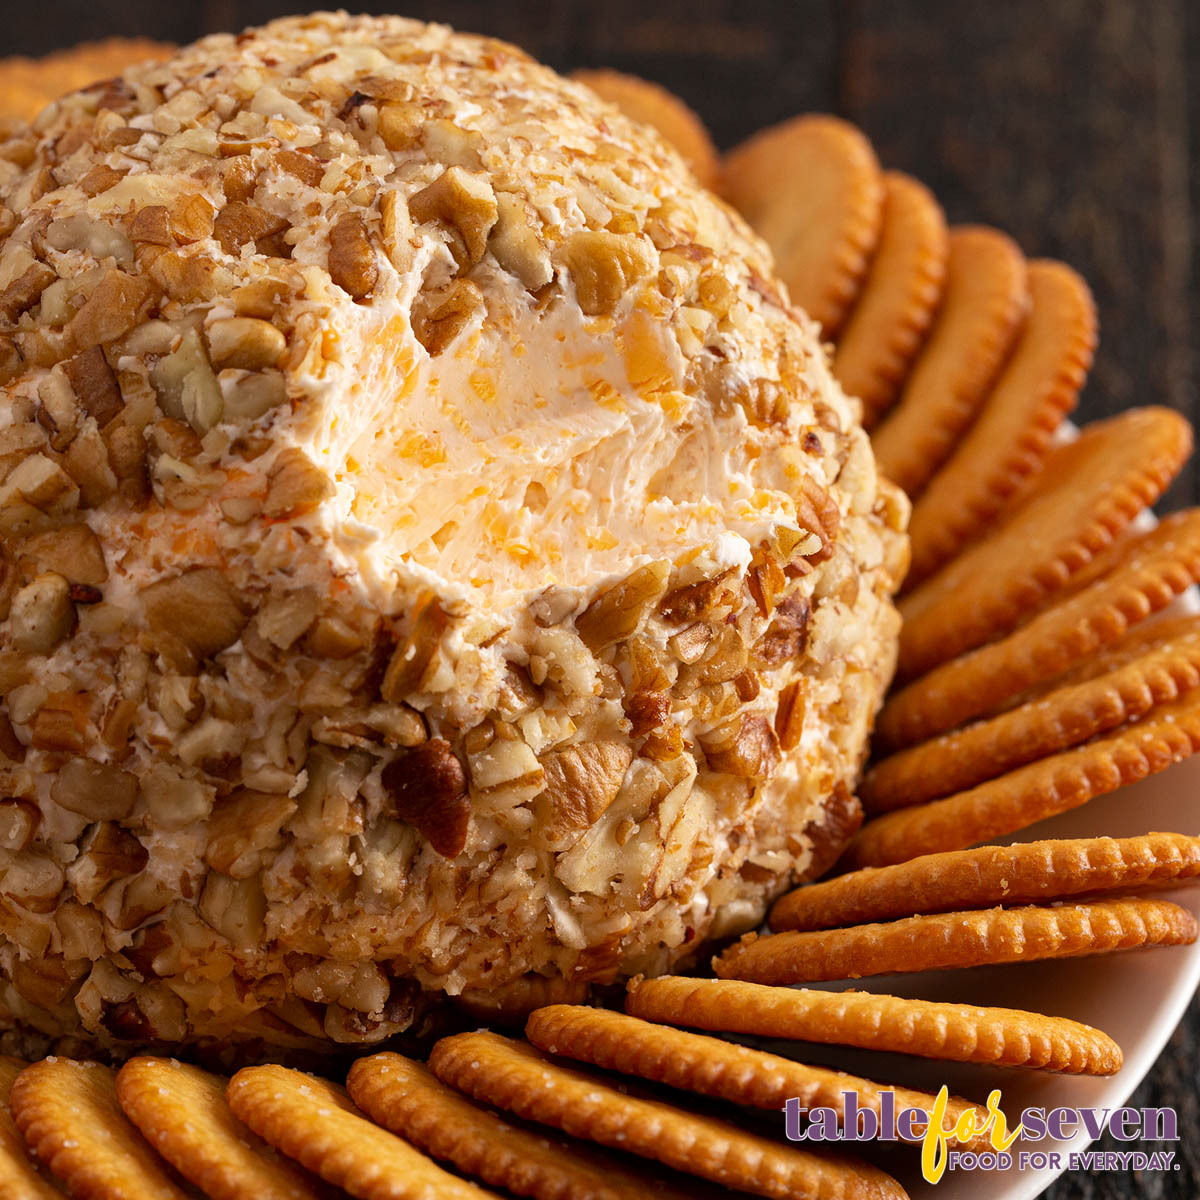 Cheese ball served with crackers